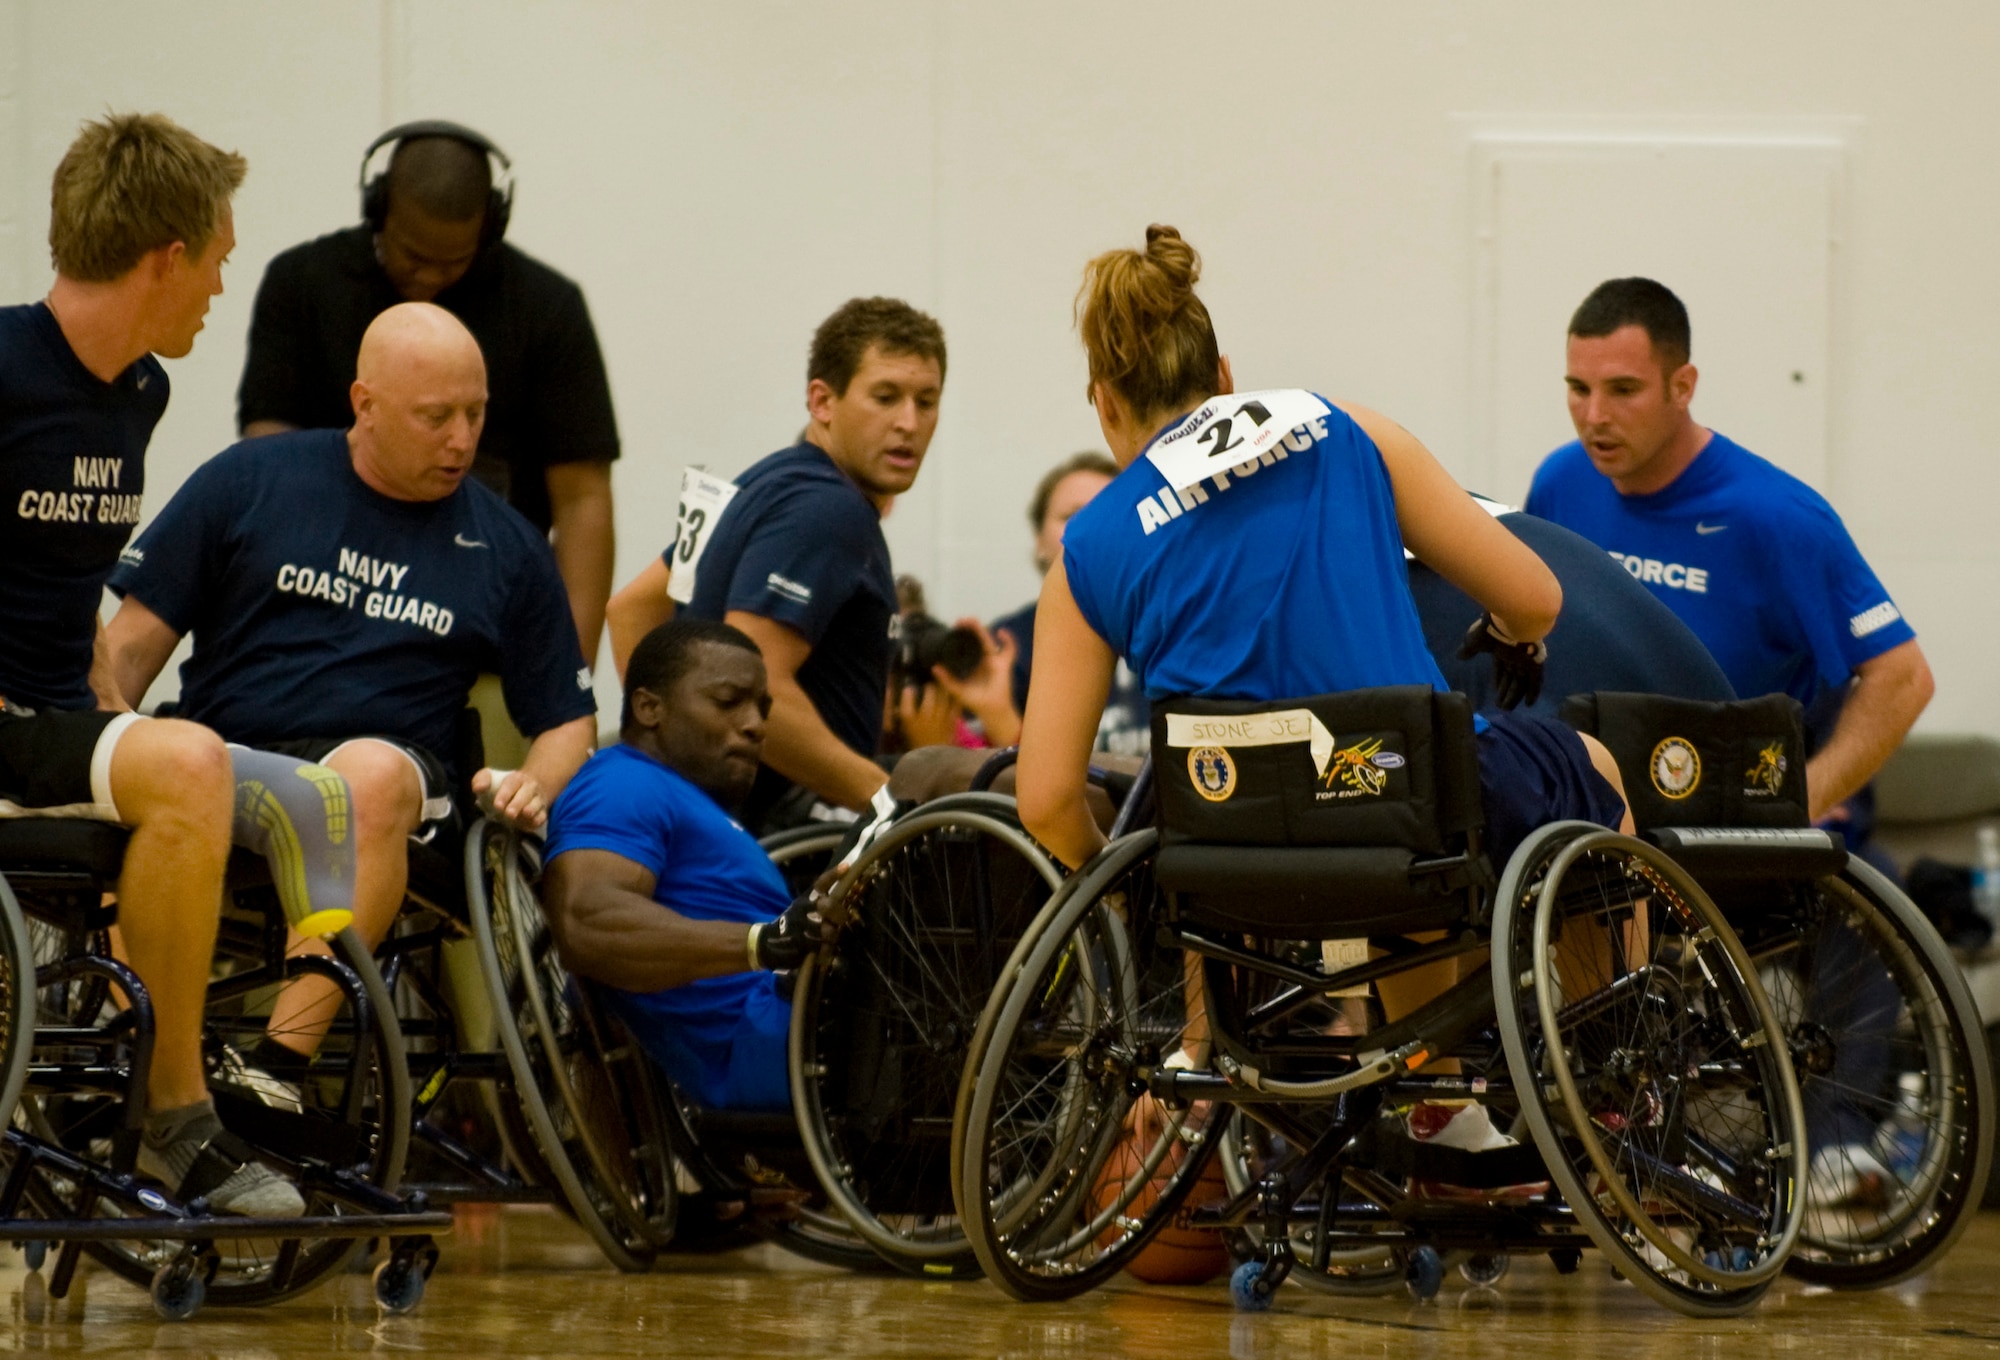 The Air Force wheelchair basketball team battles the Navy team for possession of the ball May 17, 2011, during the 2011 Warrior Games in Colorado Springs, Colo. The Navy beat the Air Force 23-14 and next will face the Marine Corps.  The Air Force team will play the Army. (U.S. Air Force photo/Staff Sgt. Christopher Griffin)